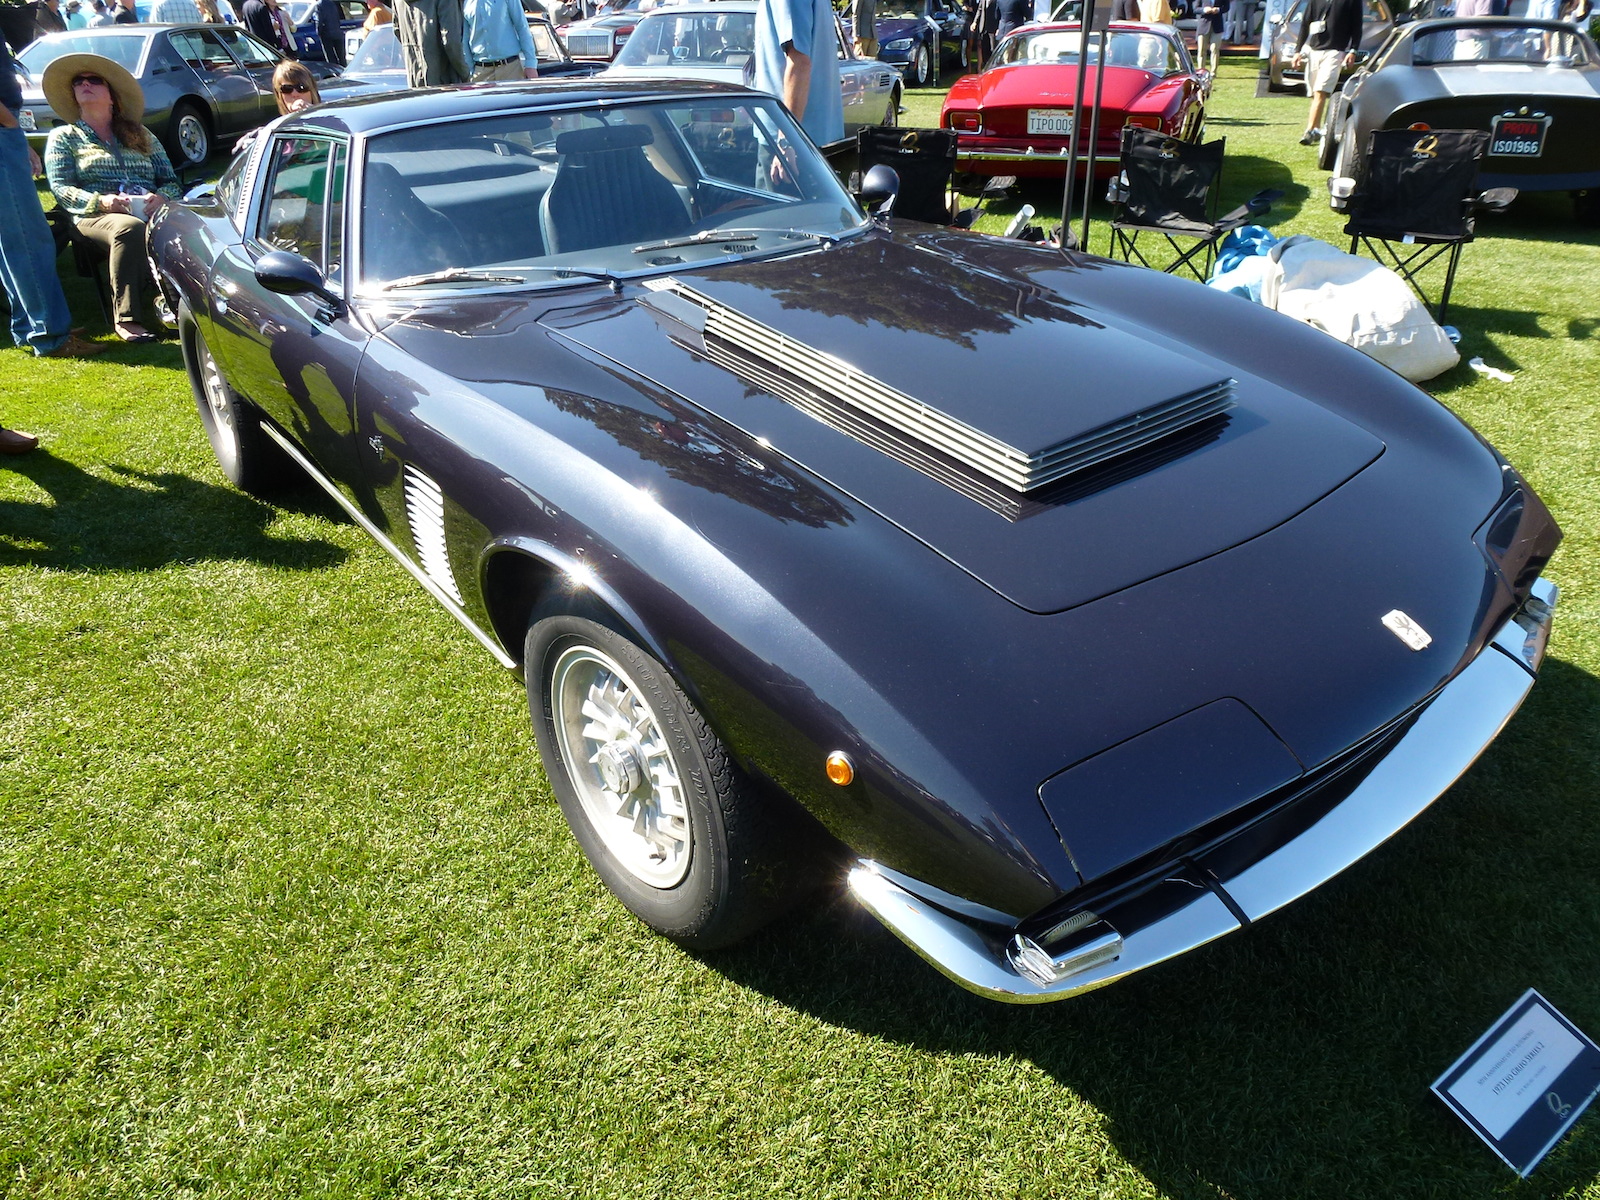 Another Iso Grifo For Sale In Amelia Island This Year